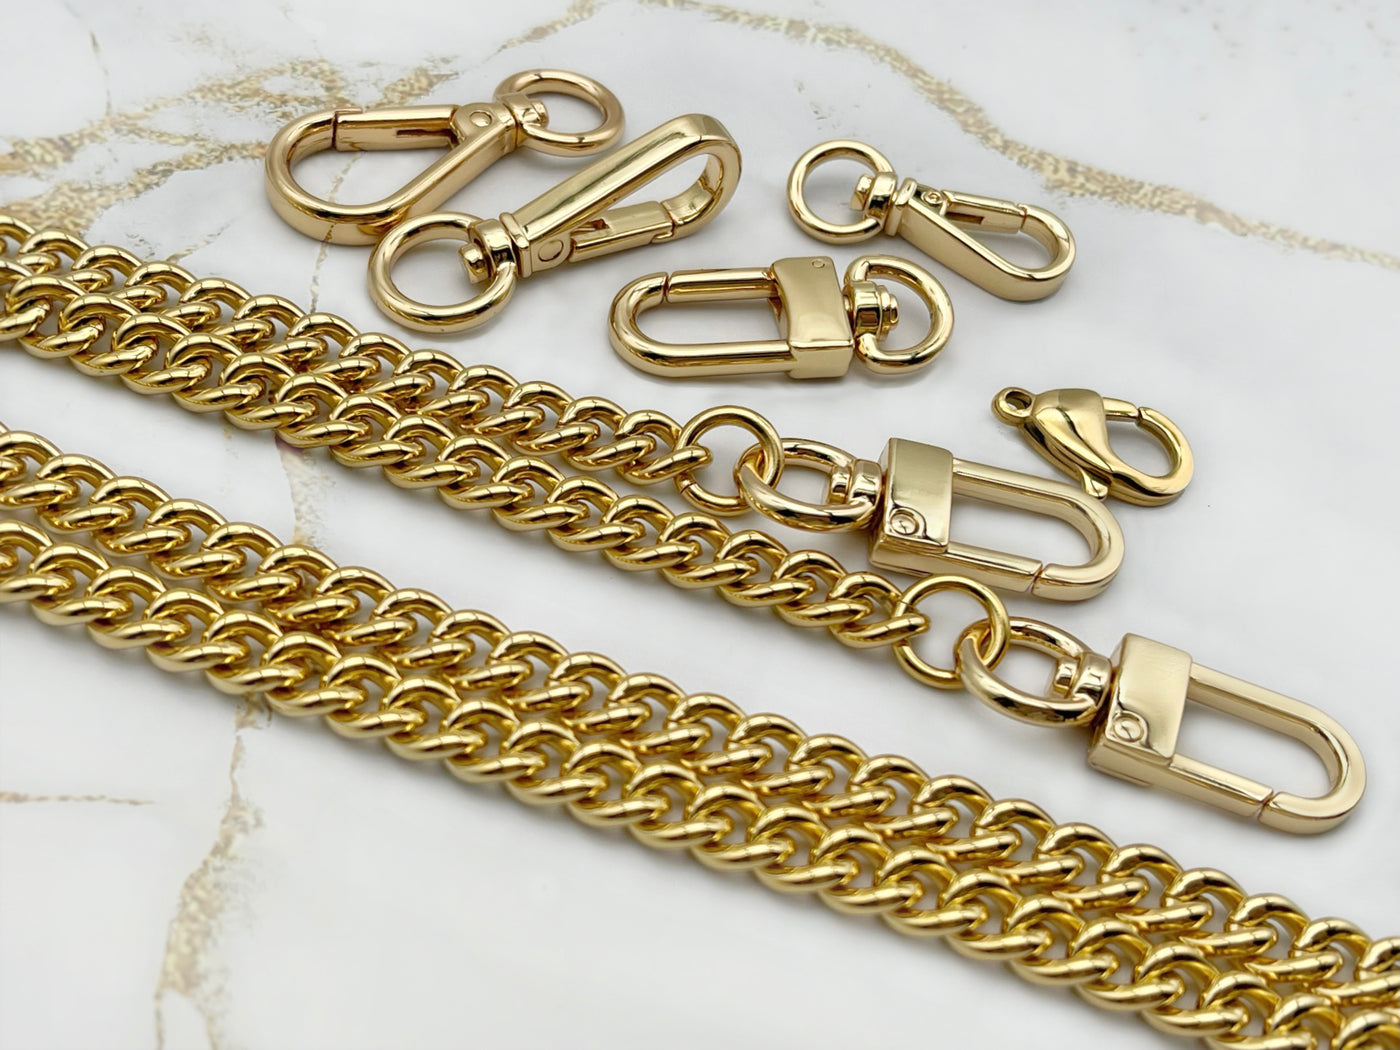 How to Use D-rings for Purse Straps - 4 Proper Ways